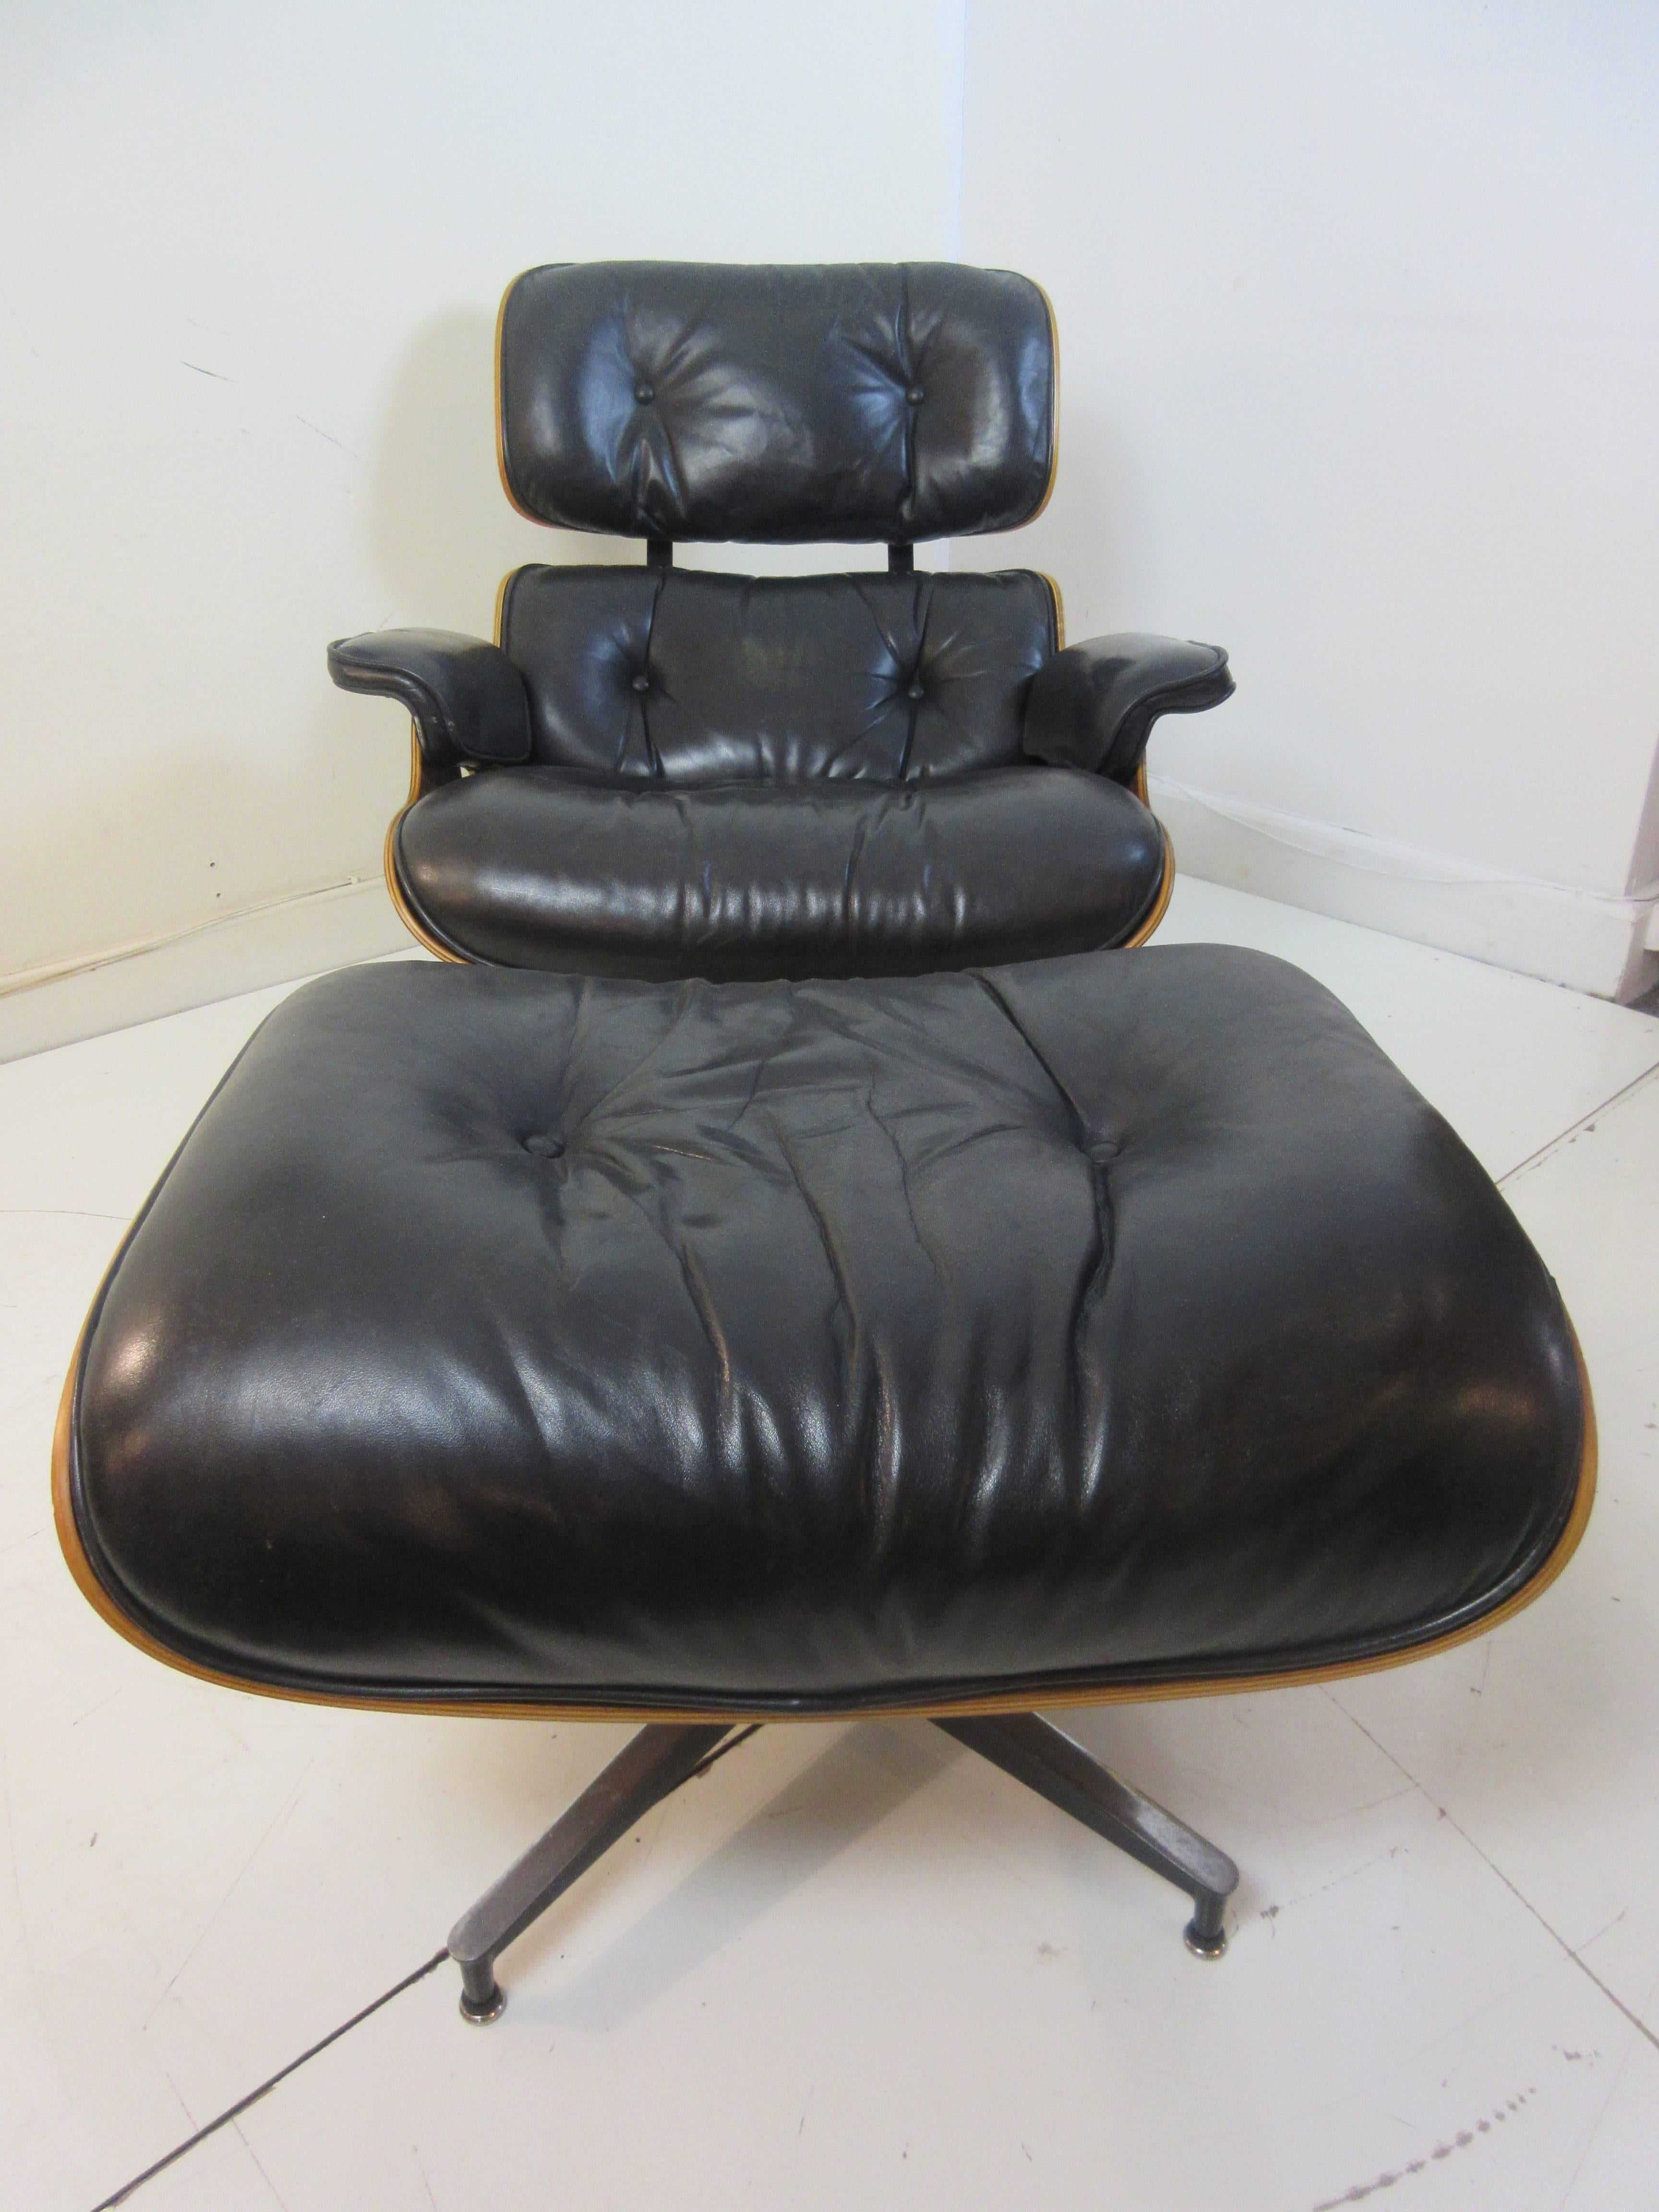 Charles Eames rosewood 670/71 chair and ottoman for Herman Miller with exceptional original shiny leather. Label remains. This addition is from the 1970s. Wood and leather excellent.